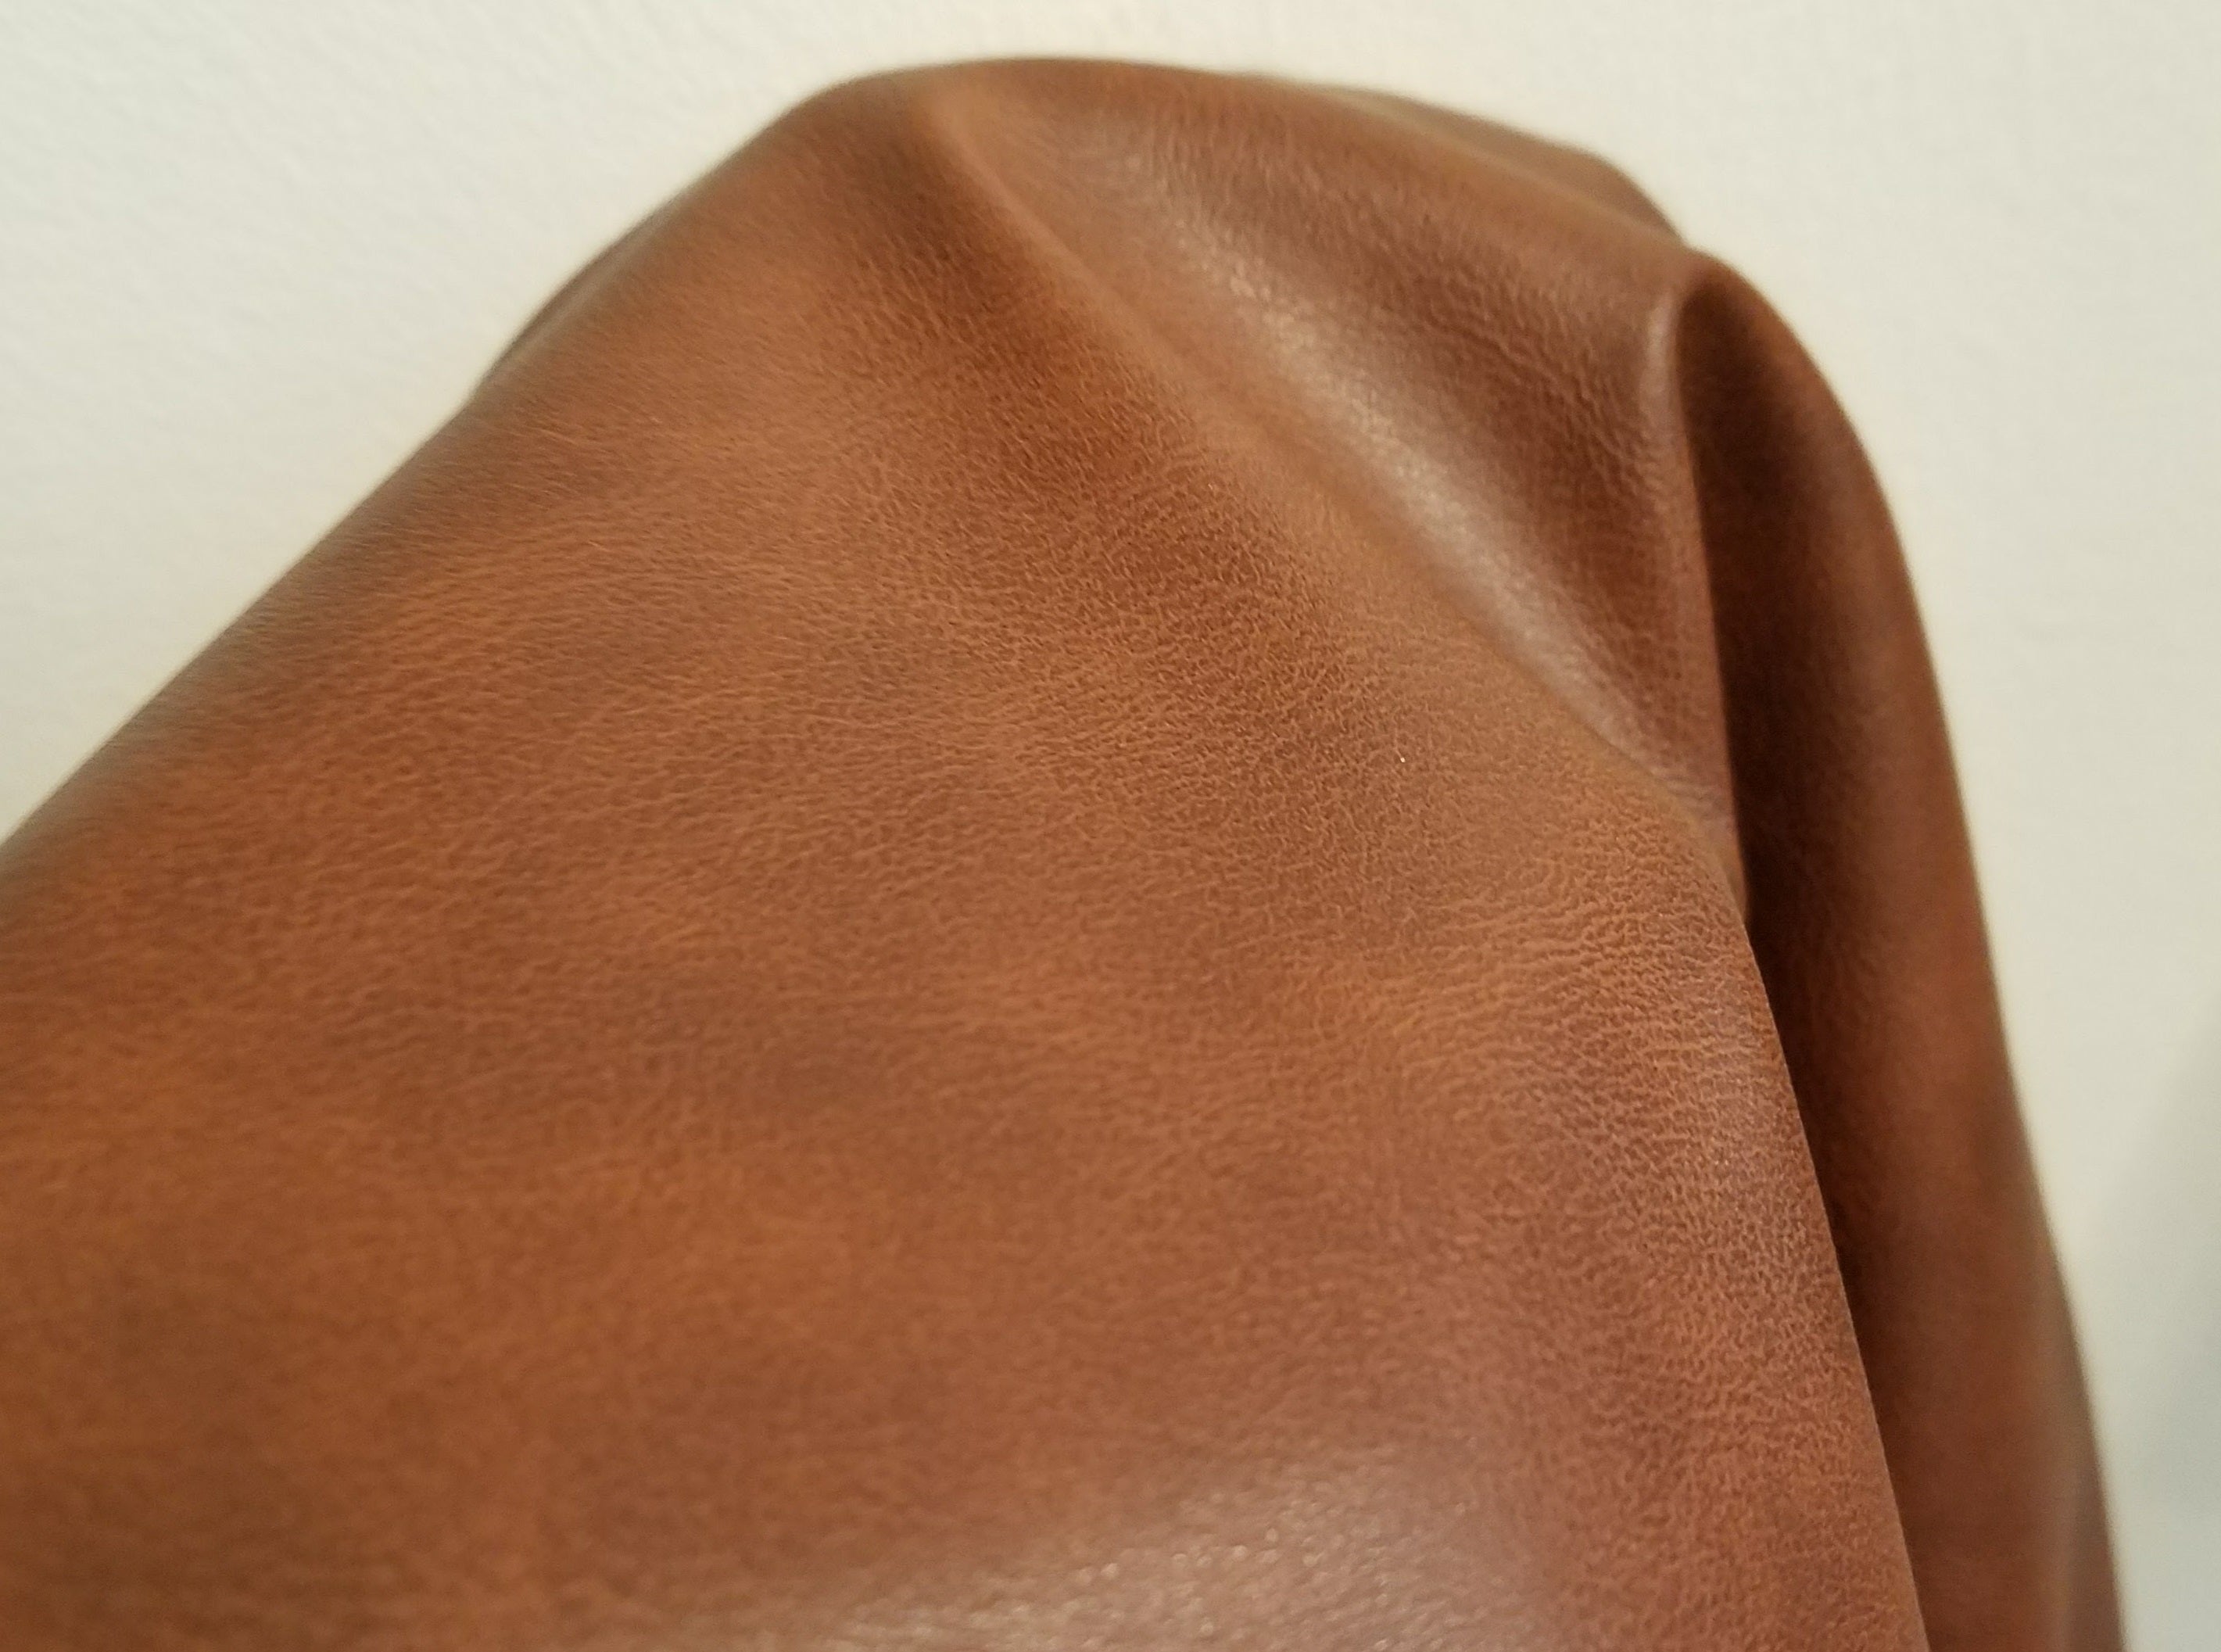  Faux vegan leather by the yard sheets distressed leather fabric for upholstery 30,000 Double Rubs vinyl sheets nappa leather crafts bookbinding books furniture fabrics uphilstery fuax material pu pleather faiux learher cruelty free nappa seat cognac brown